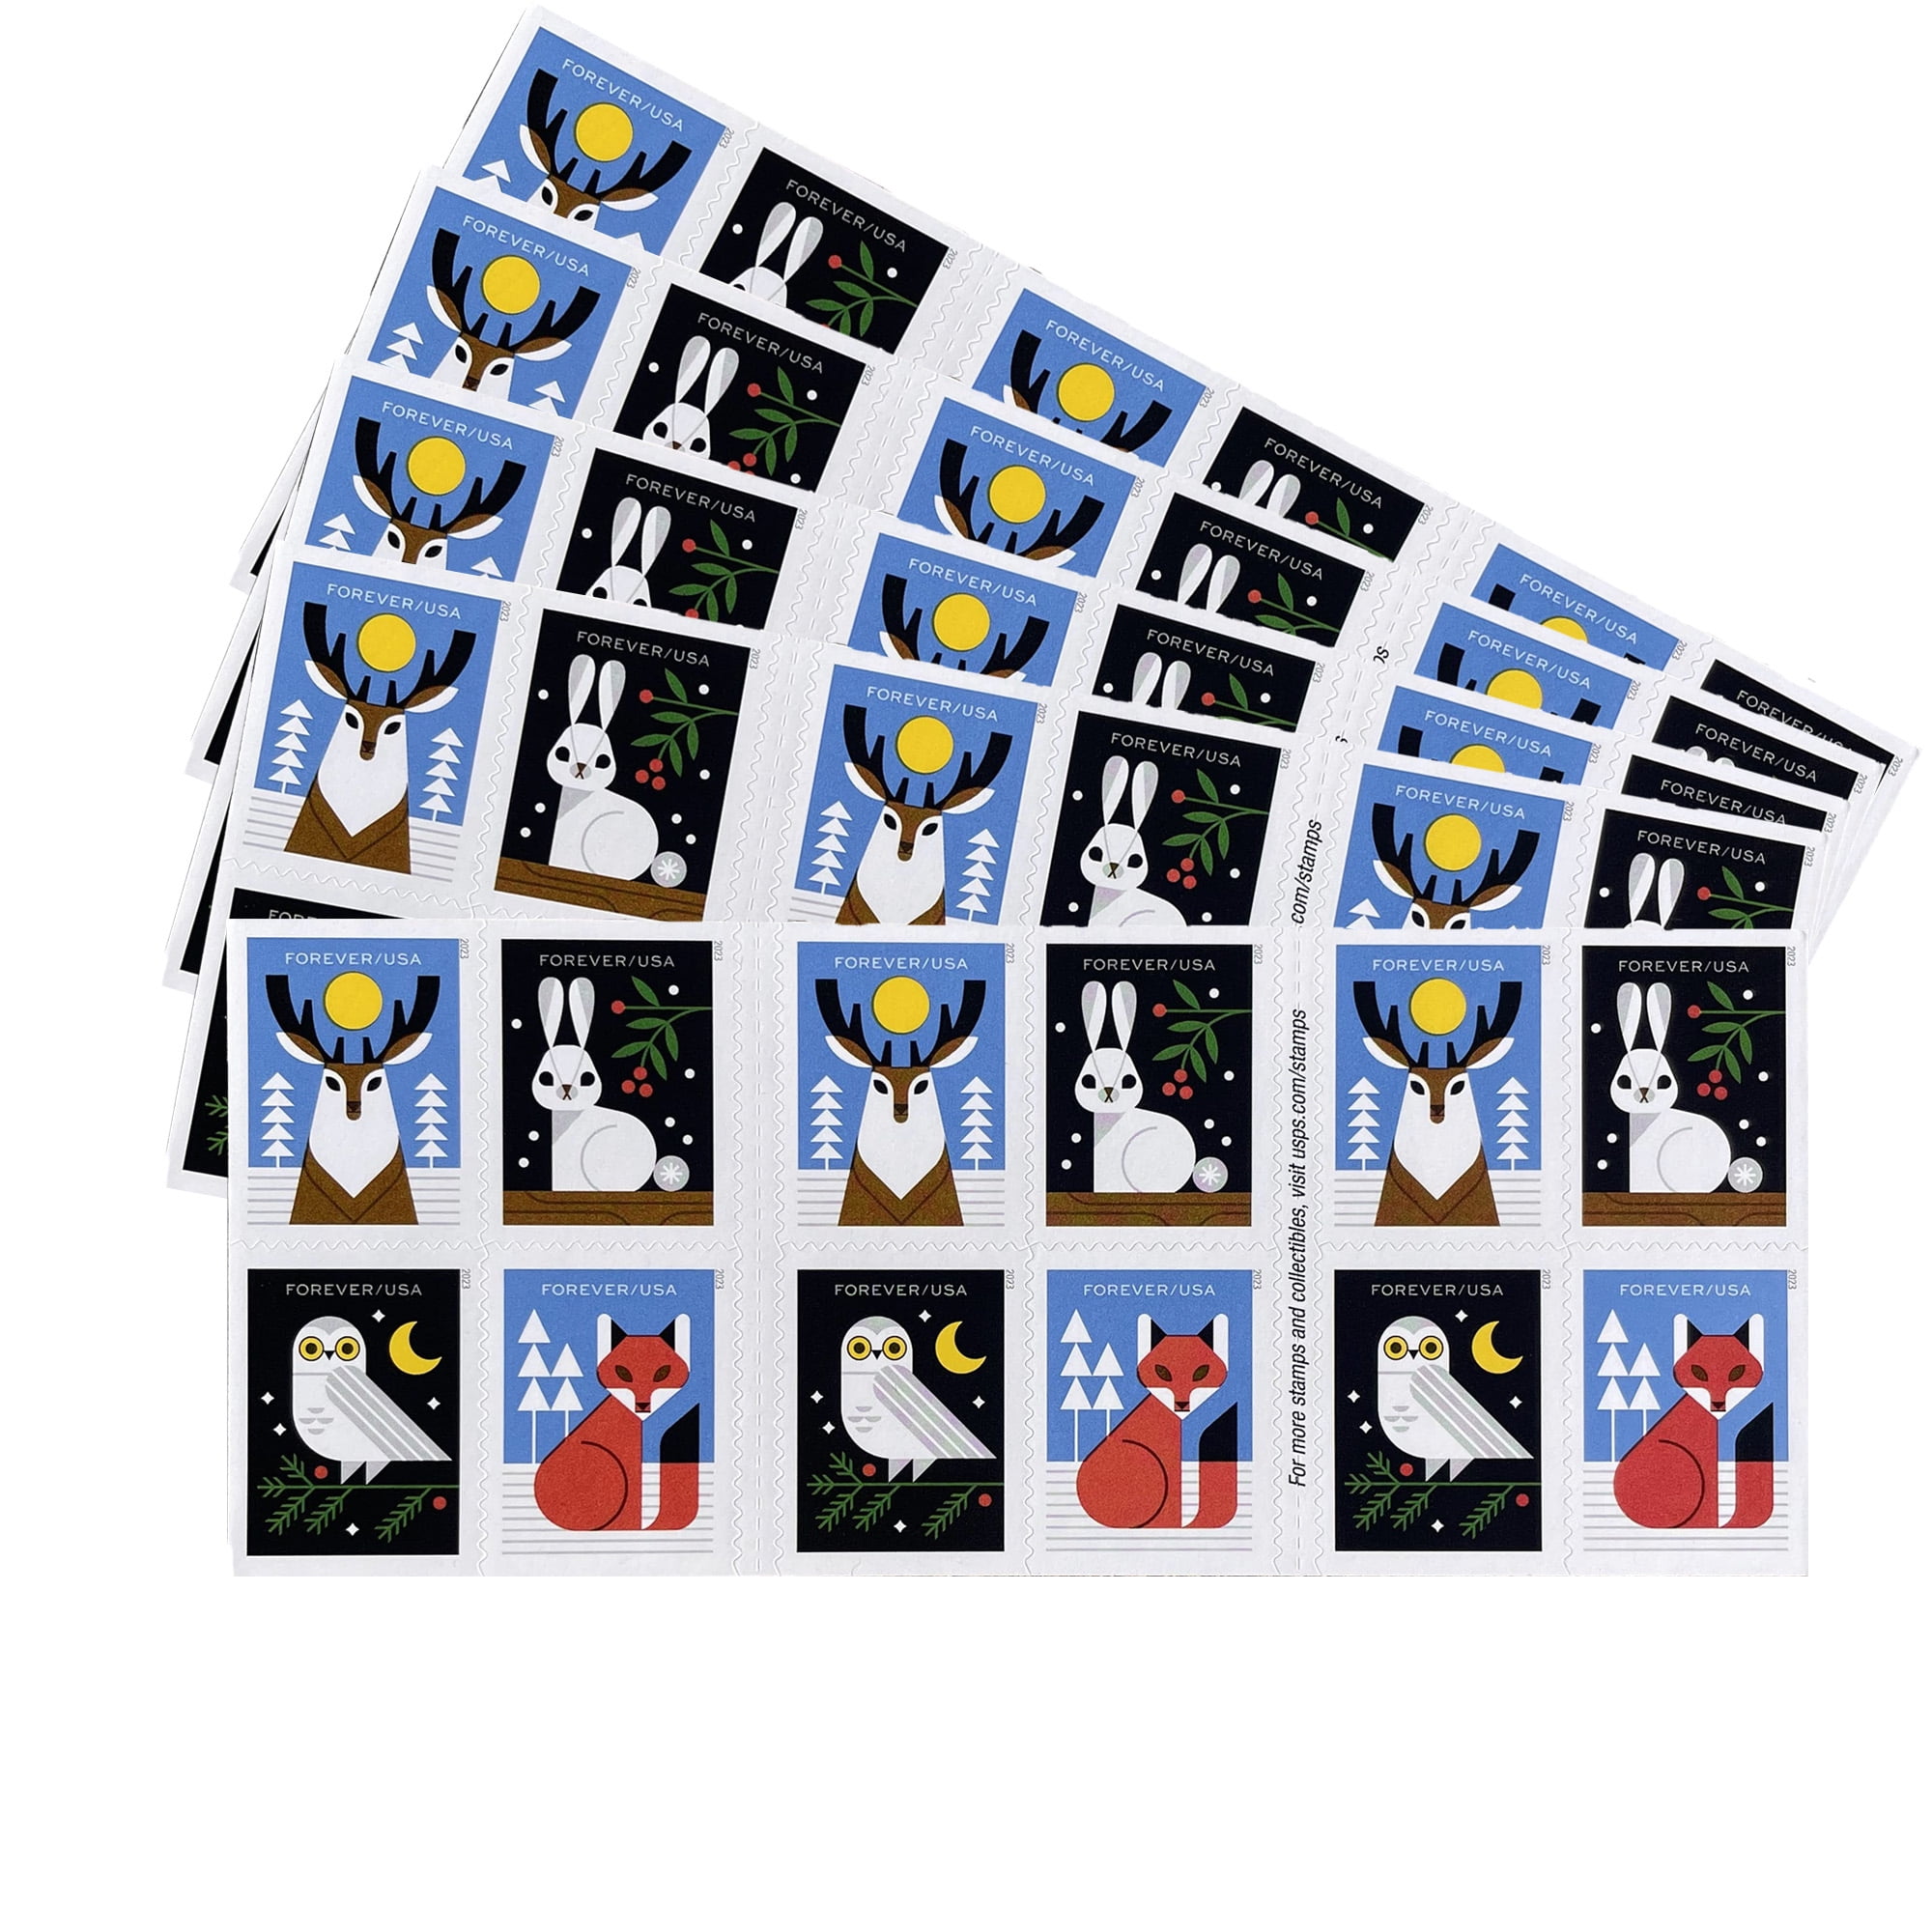 USPS Holiday Windows Forever Stamps 100 Stamps (5 Books of 20)